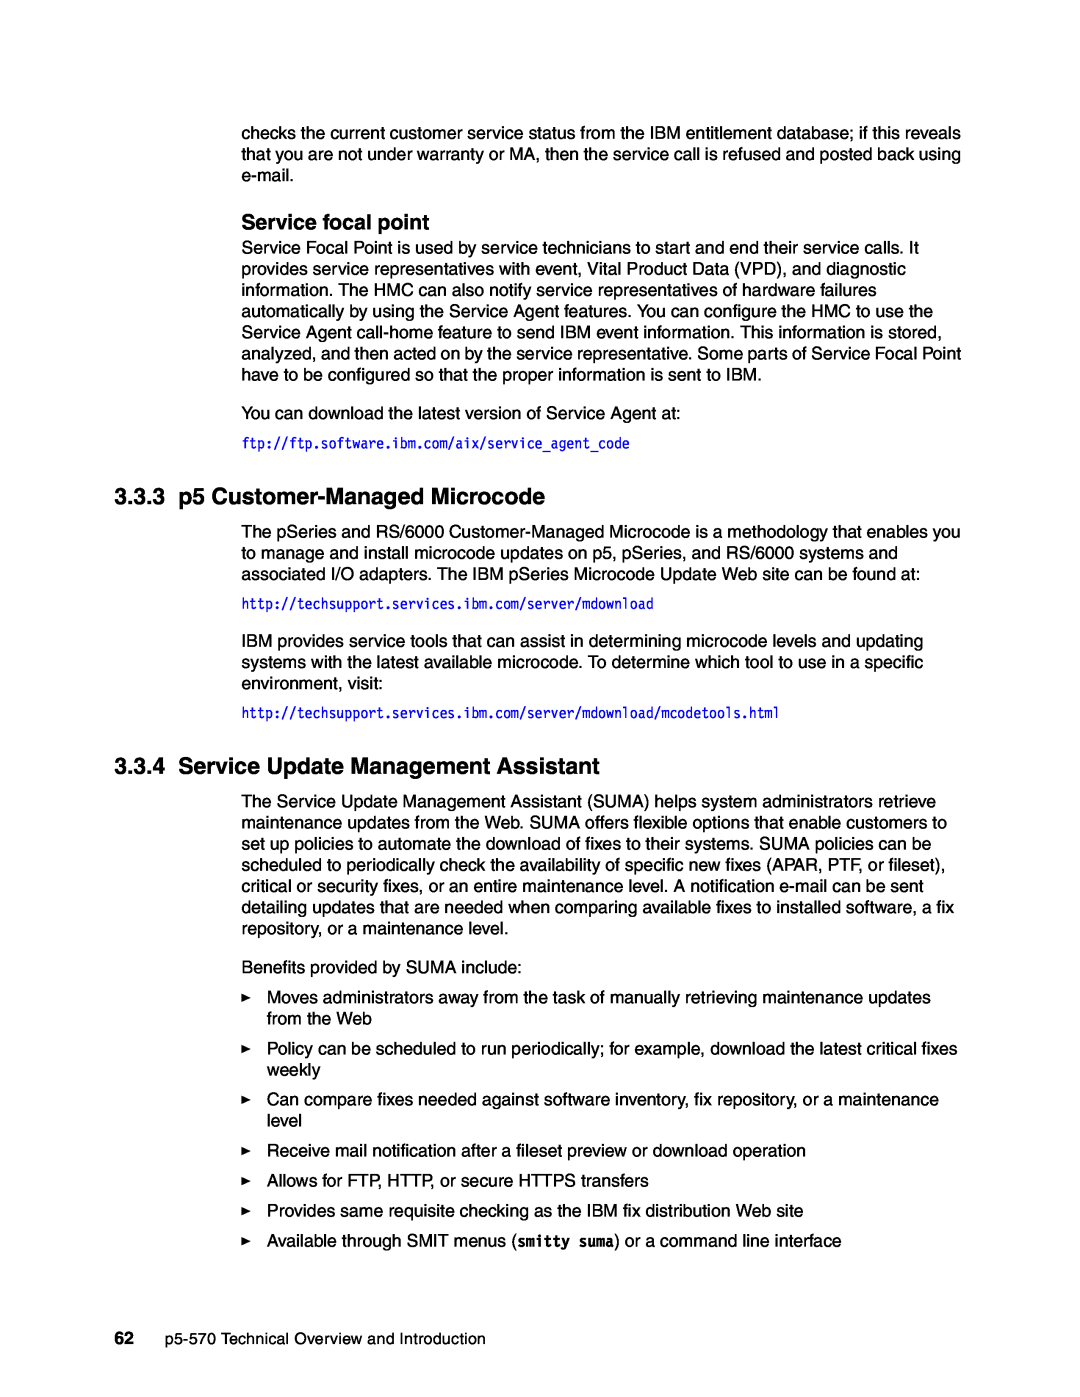 IBM P5 570 manual 3.3.3 p5 Customer-ManagedMicrocode, Service Update Management Assistant, Service focal point 